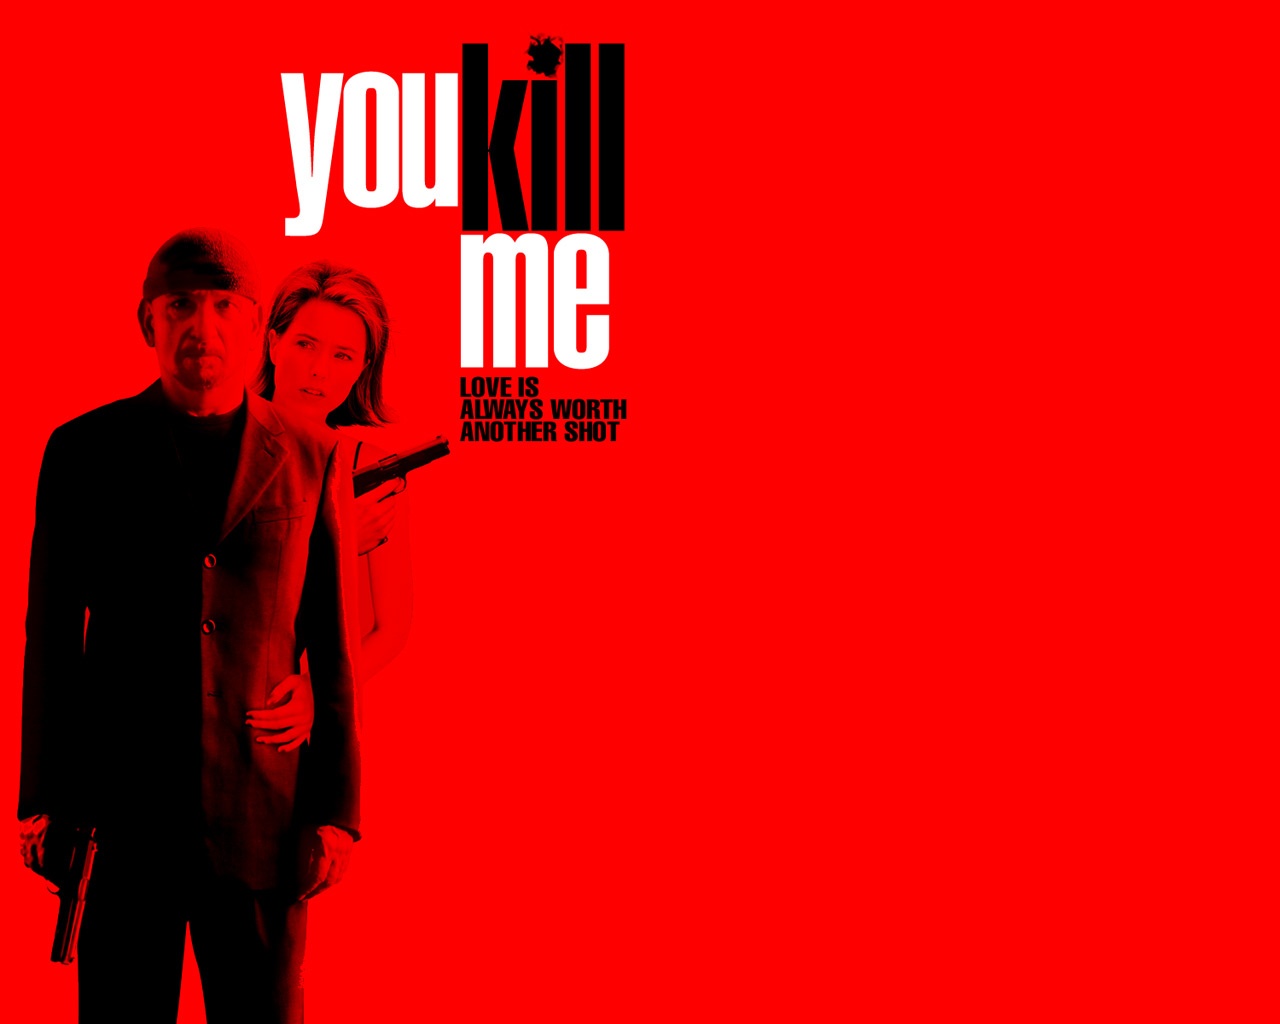 you and me wallpaper,red,font,text,album cover,brand